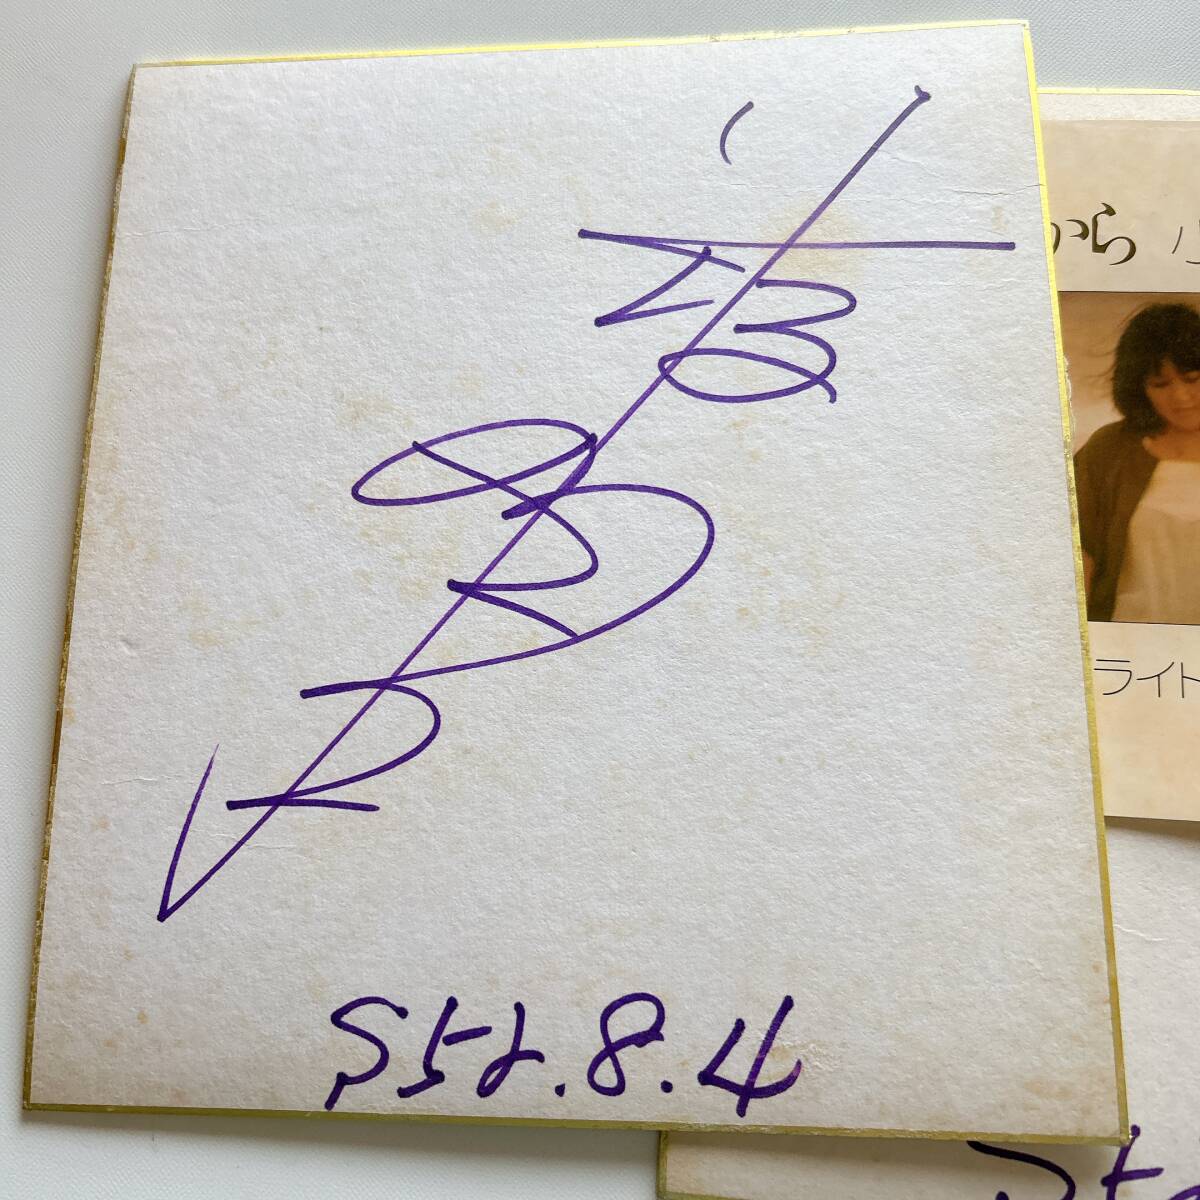 1 jpy start autograph square fancy cardboard 2 pieces set Showa era 52 year 1977 small slope Akira . now therefore that time thing autograph rare rare Showa Retro era 